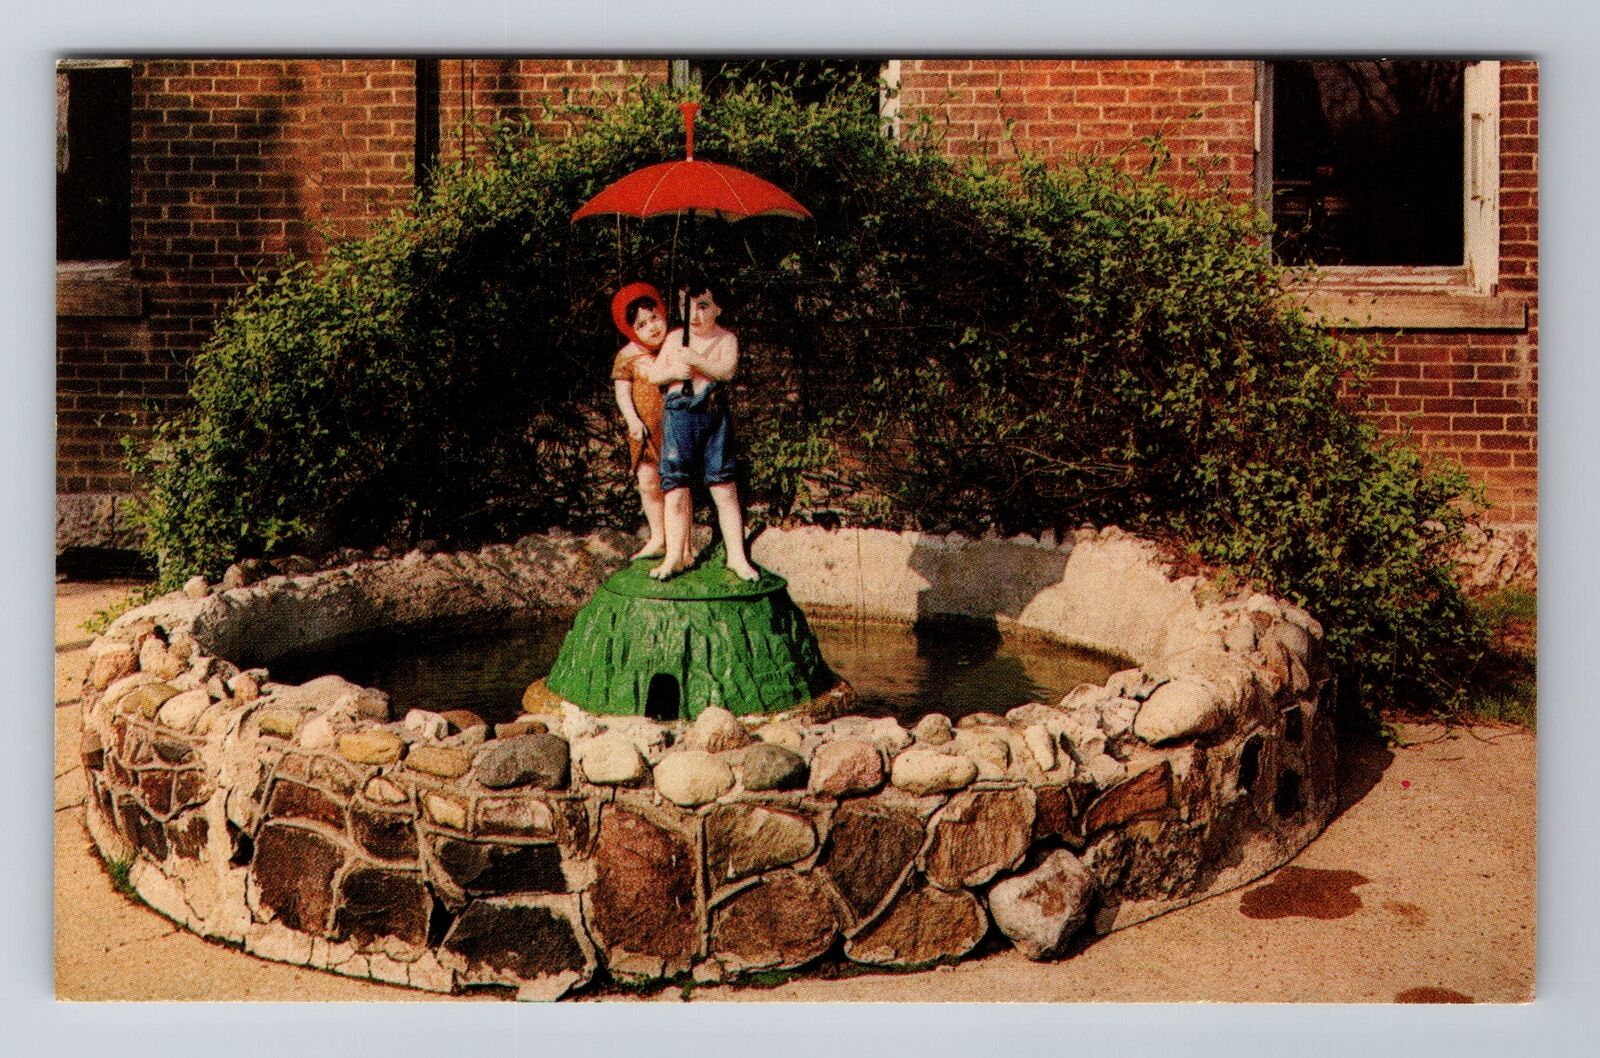 Greenville OH-Ohio, Pewter Fountain at Public Square, Antique Vintage Postcard